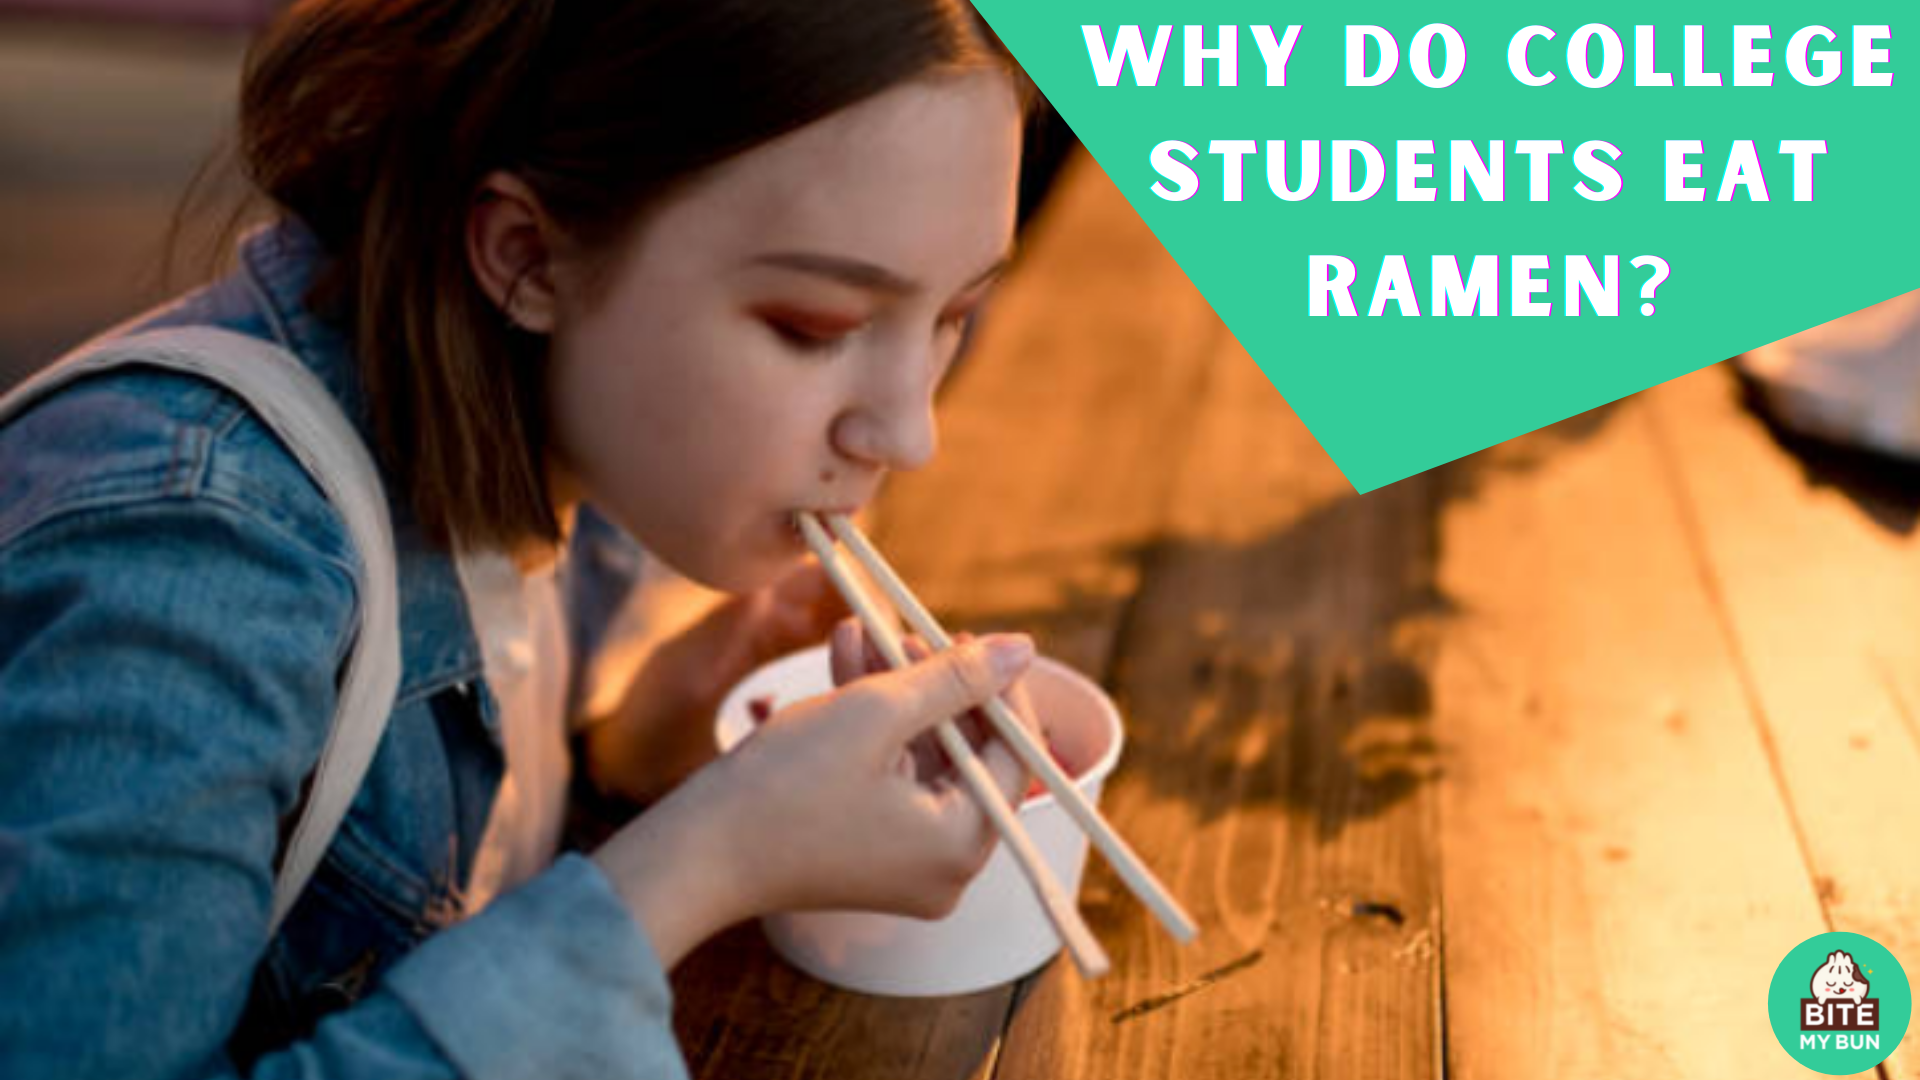 Why do college students eat ramen? It's cheap, fast and yummy